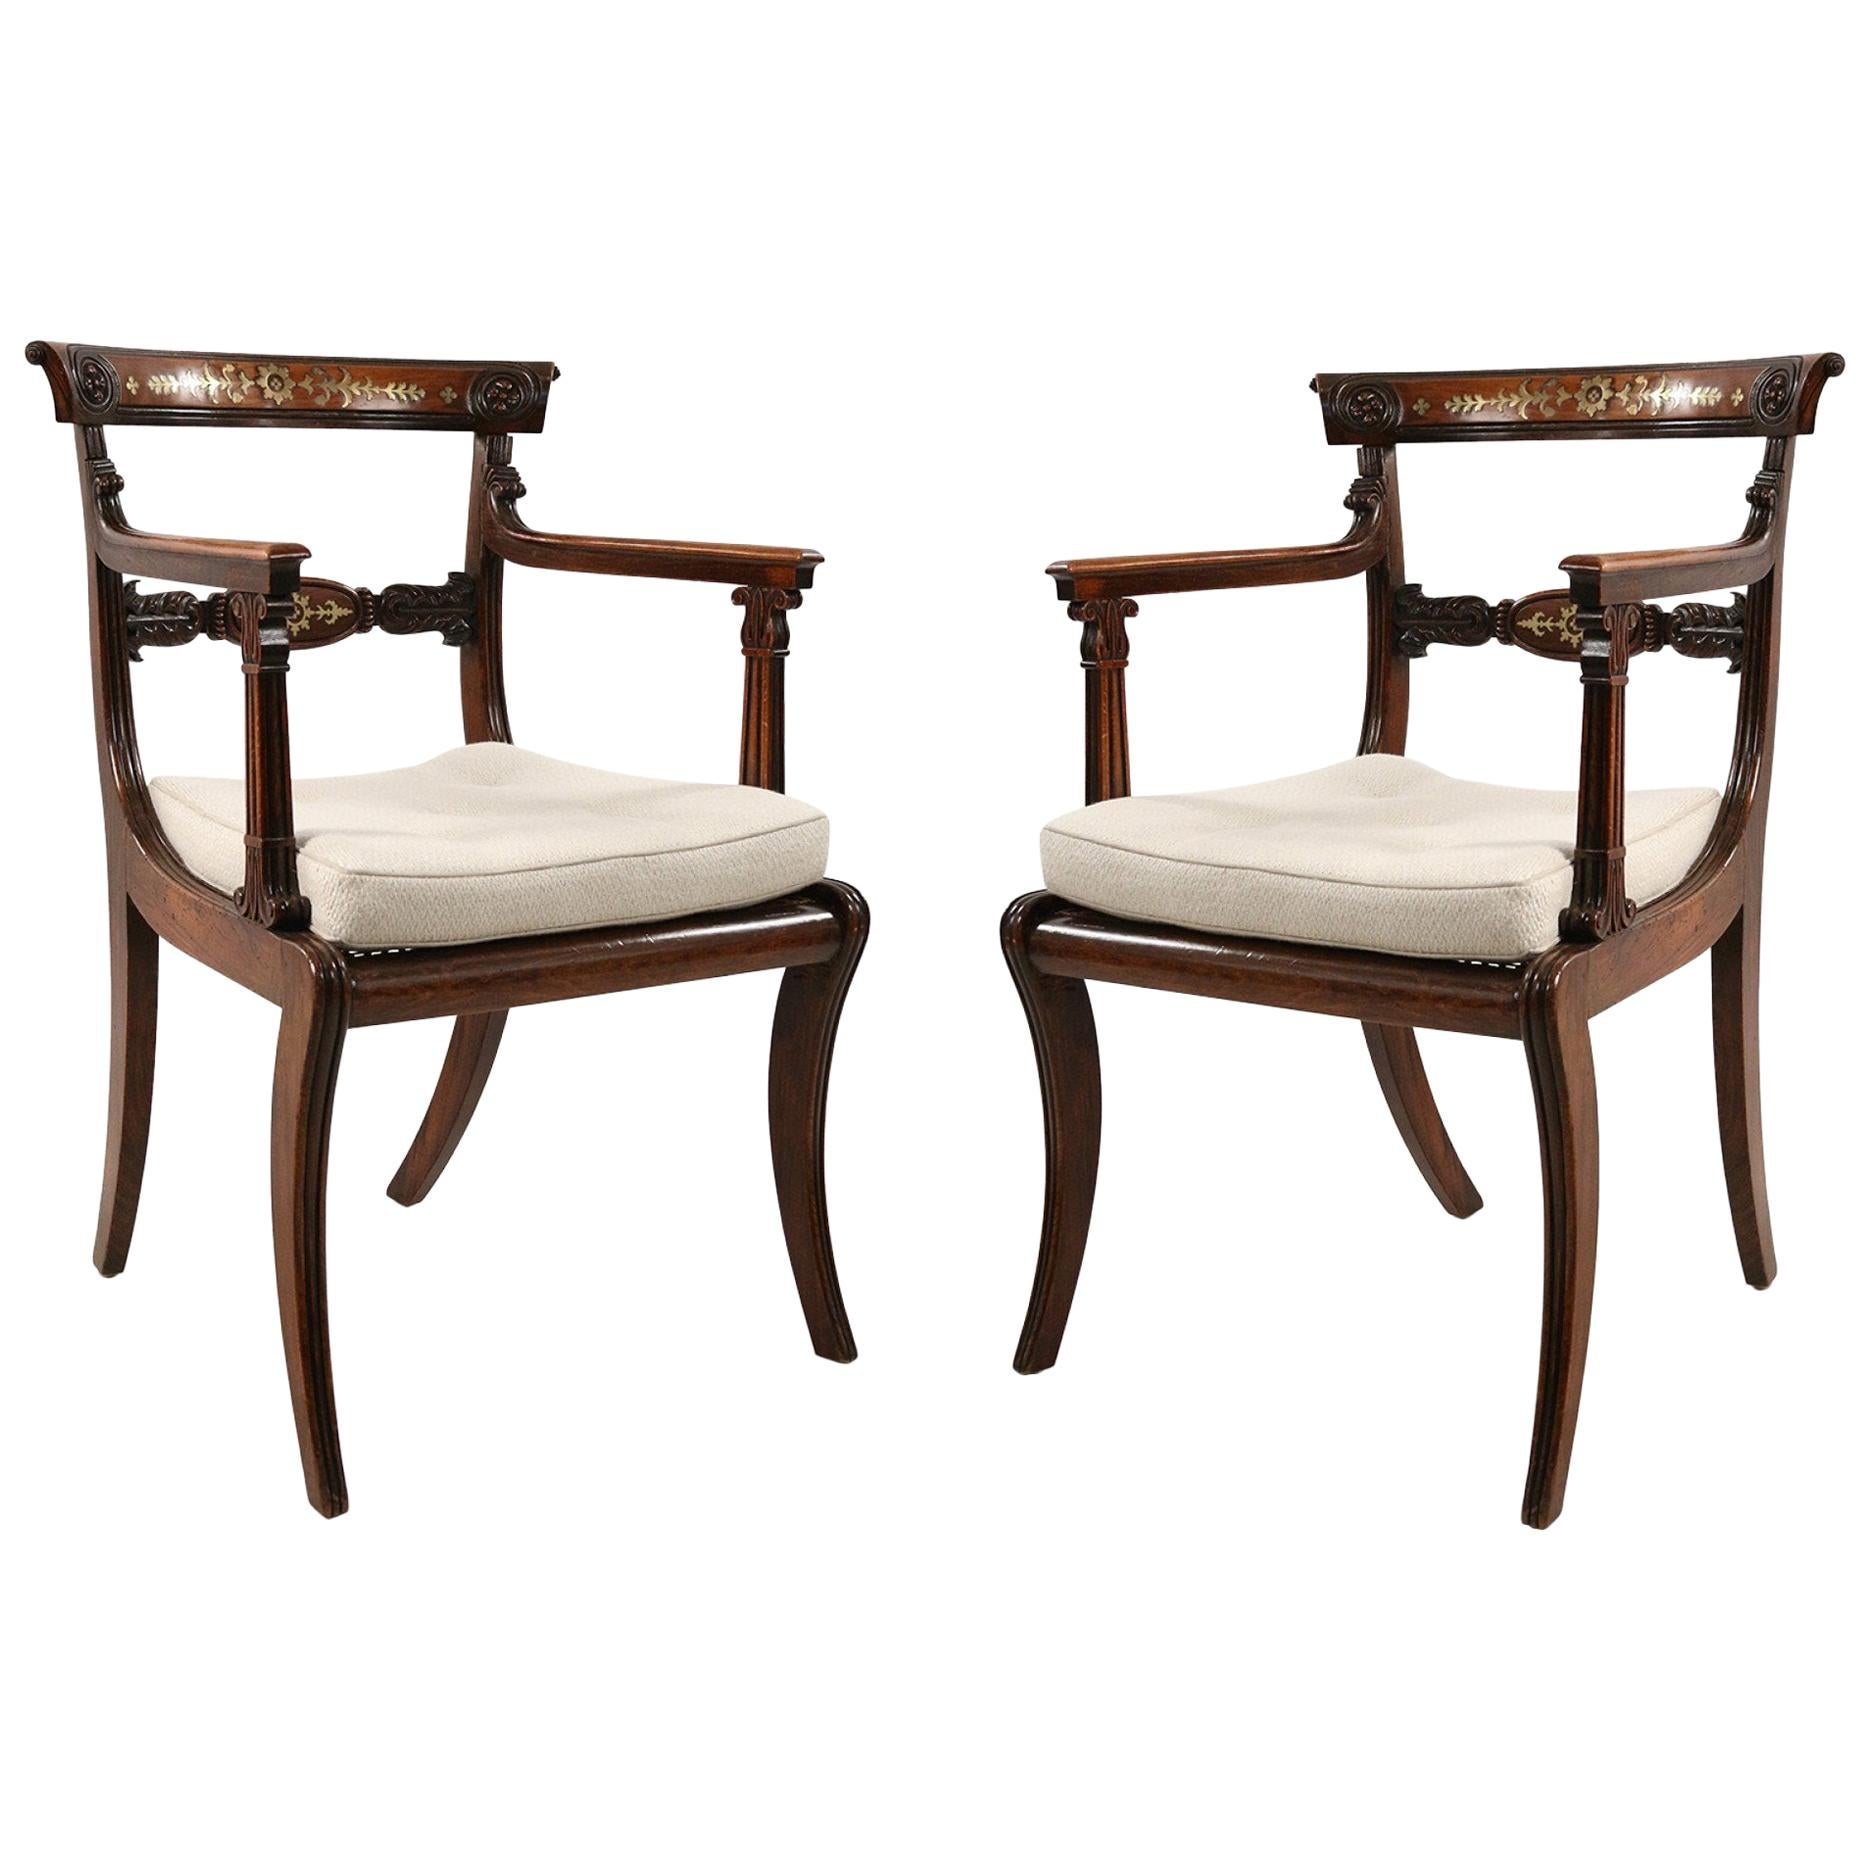 Pair of English Regency Style Brass Inlaid Oak and Cane Armchairs